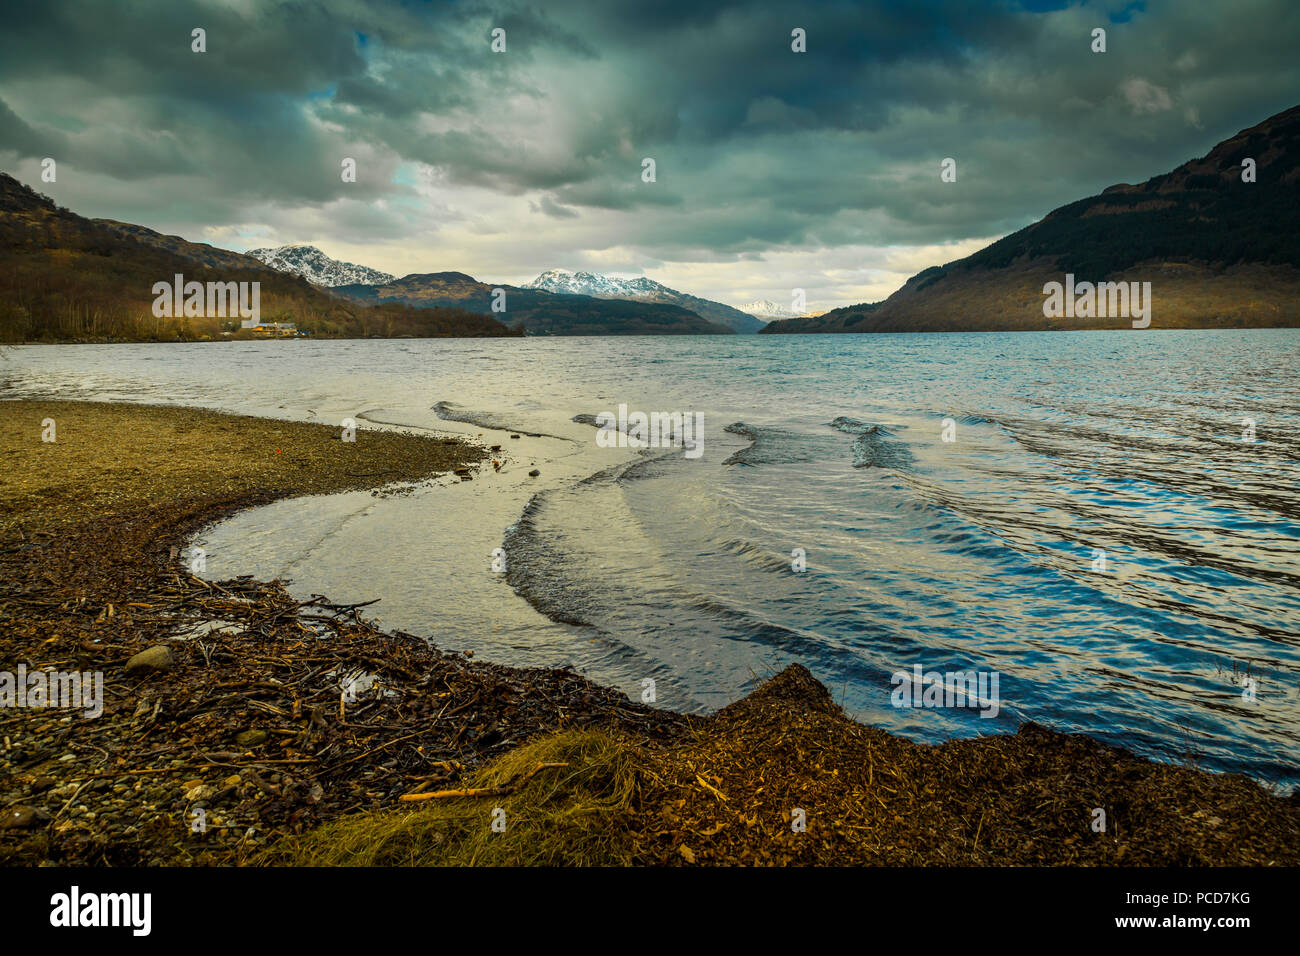 The shores of Loch Lomond in winter in the Loch Lomond and The Trossachs National Park, Stirling, Scotland, United Kingdom, Europe Stock Photo